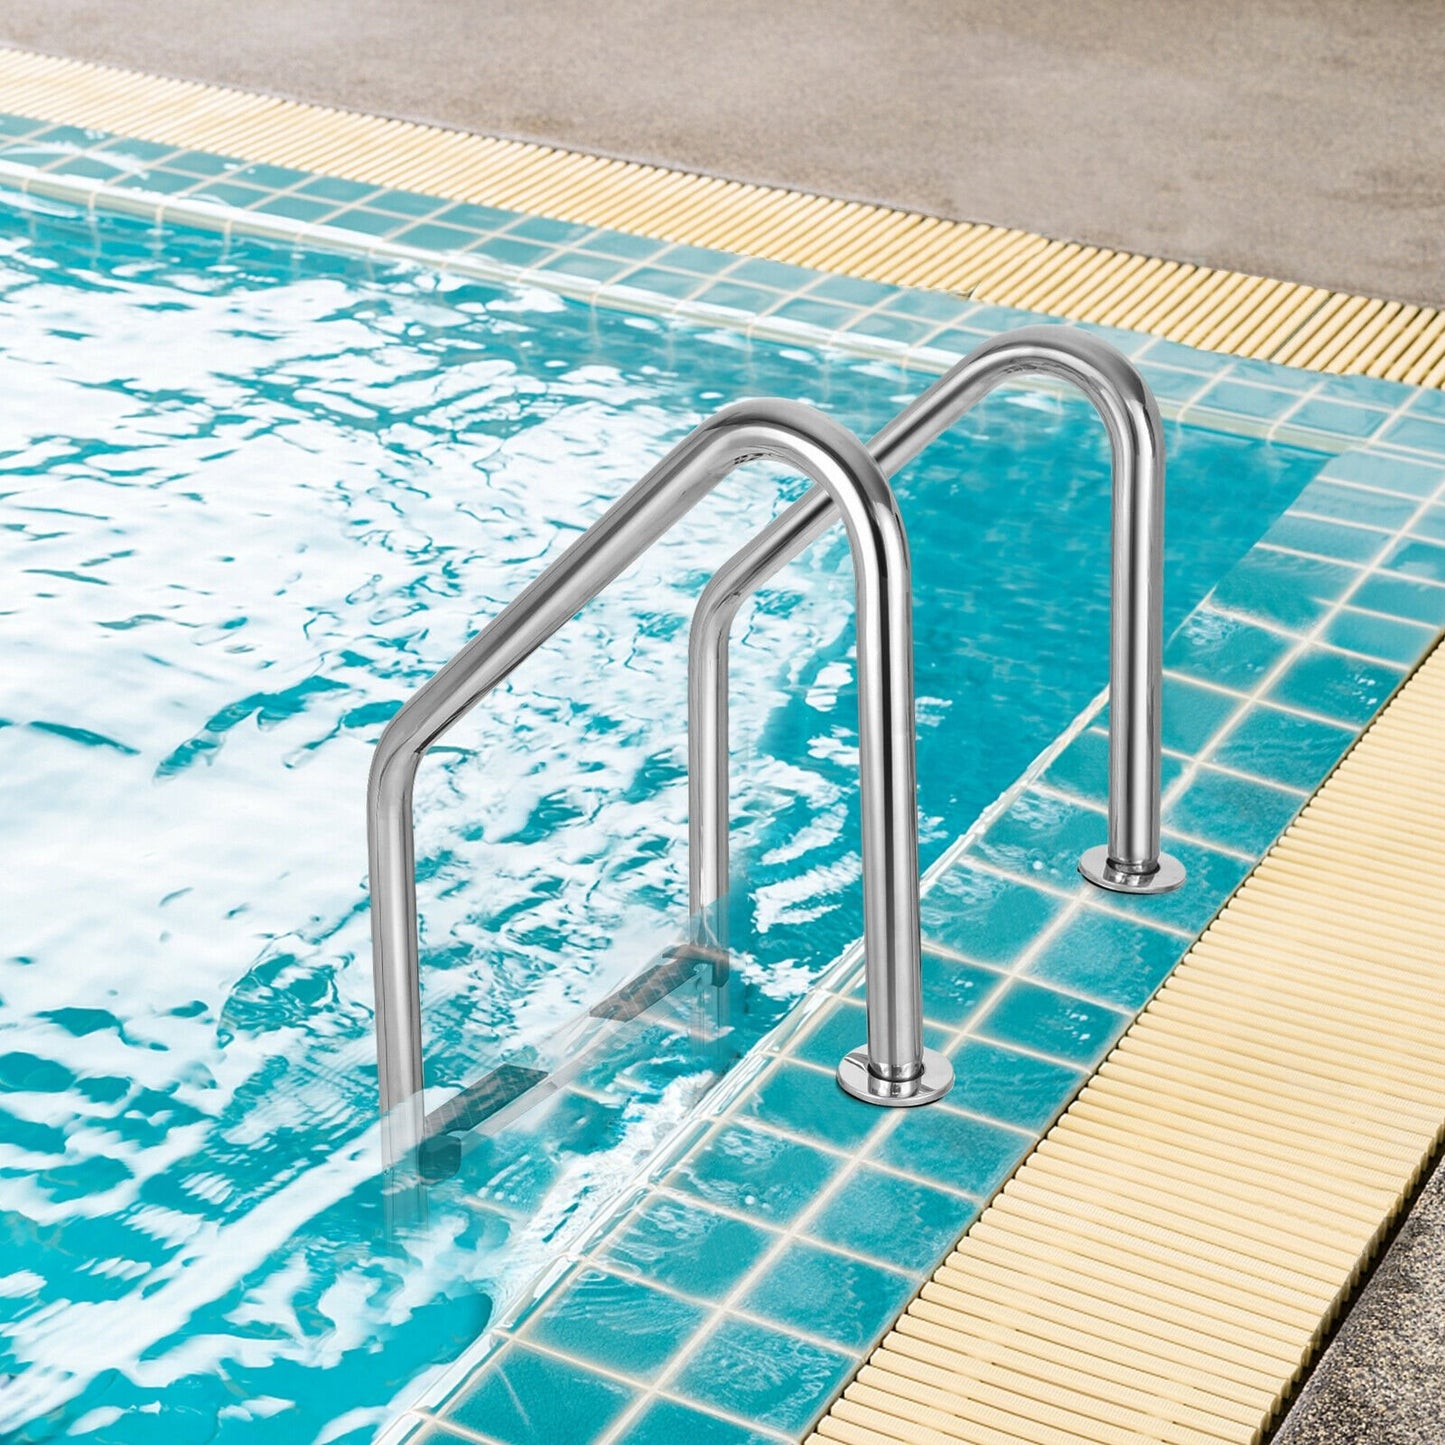 3-Step Stainless Steel Swimming Pool Ladder with Anti-Slip Step, Silver at Gallery Canada